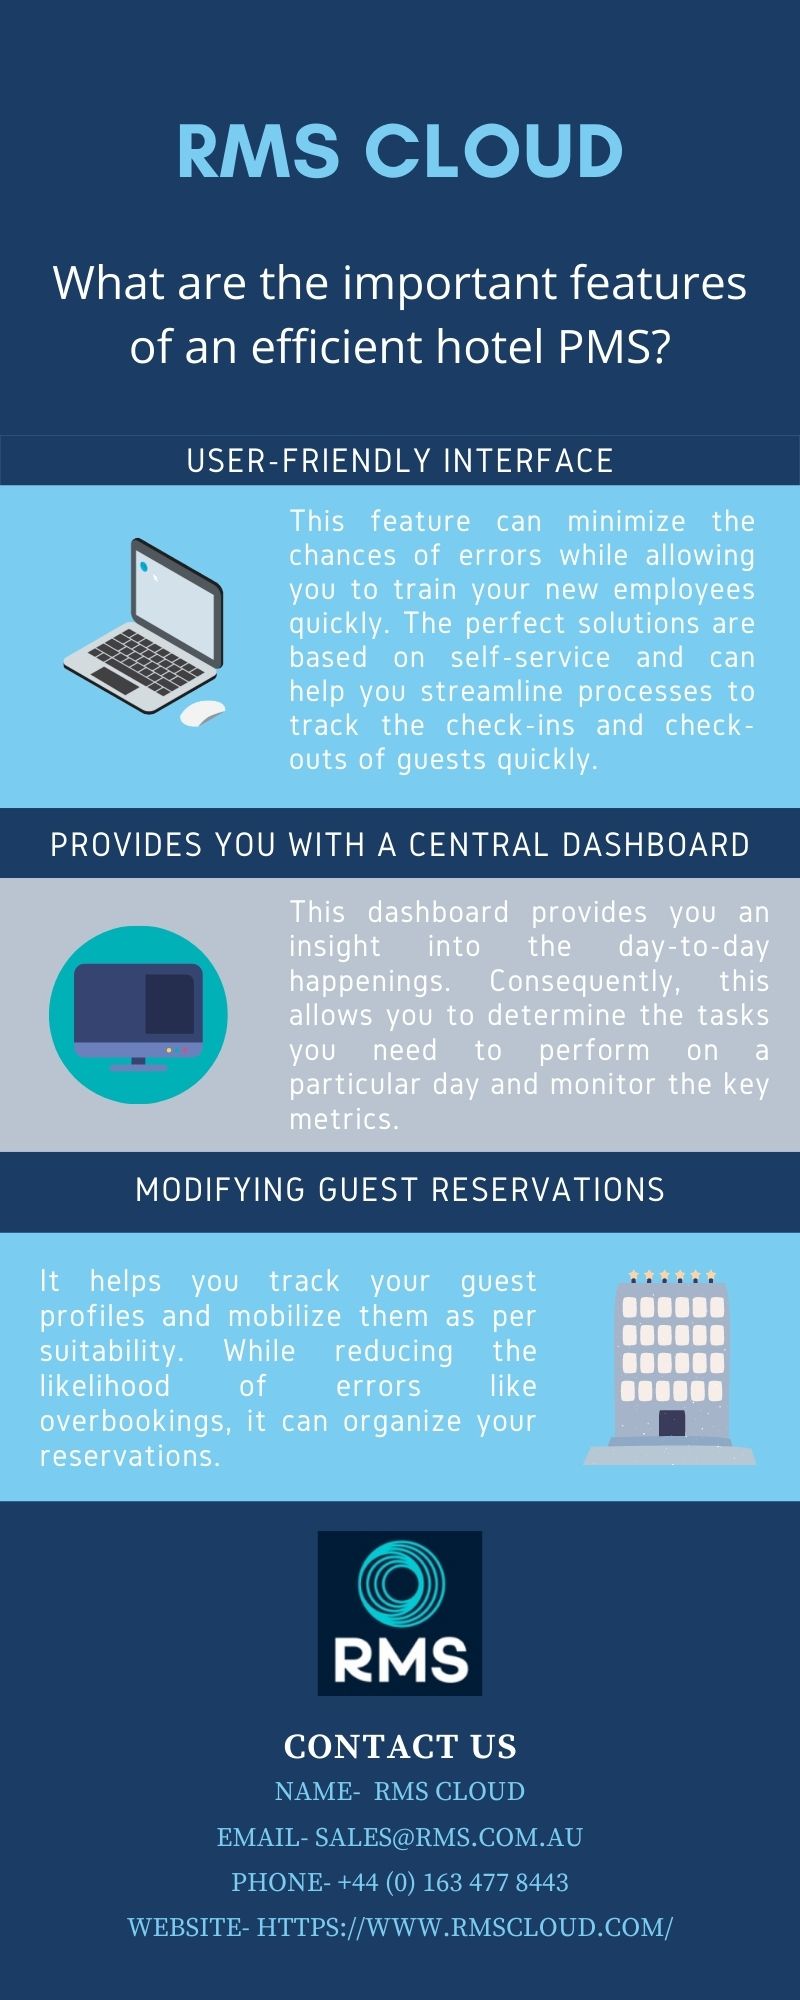 What are the important features of an efficient hotel PMS?